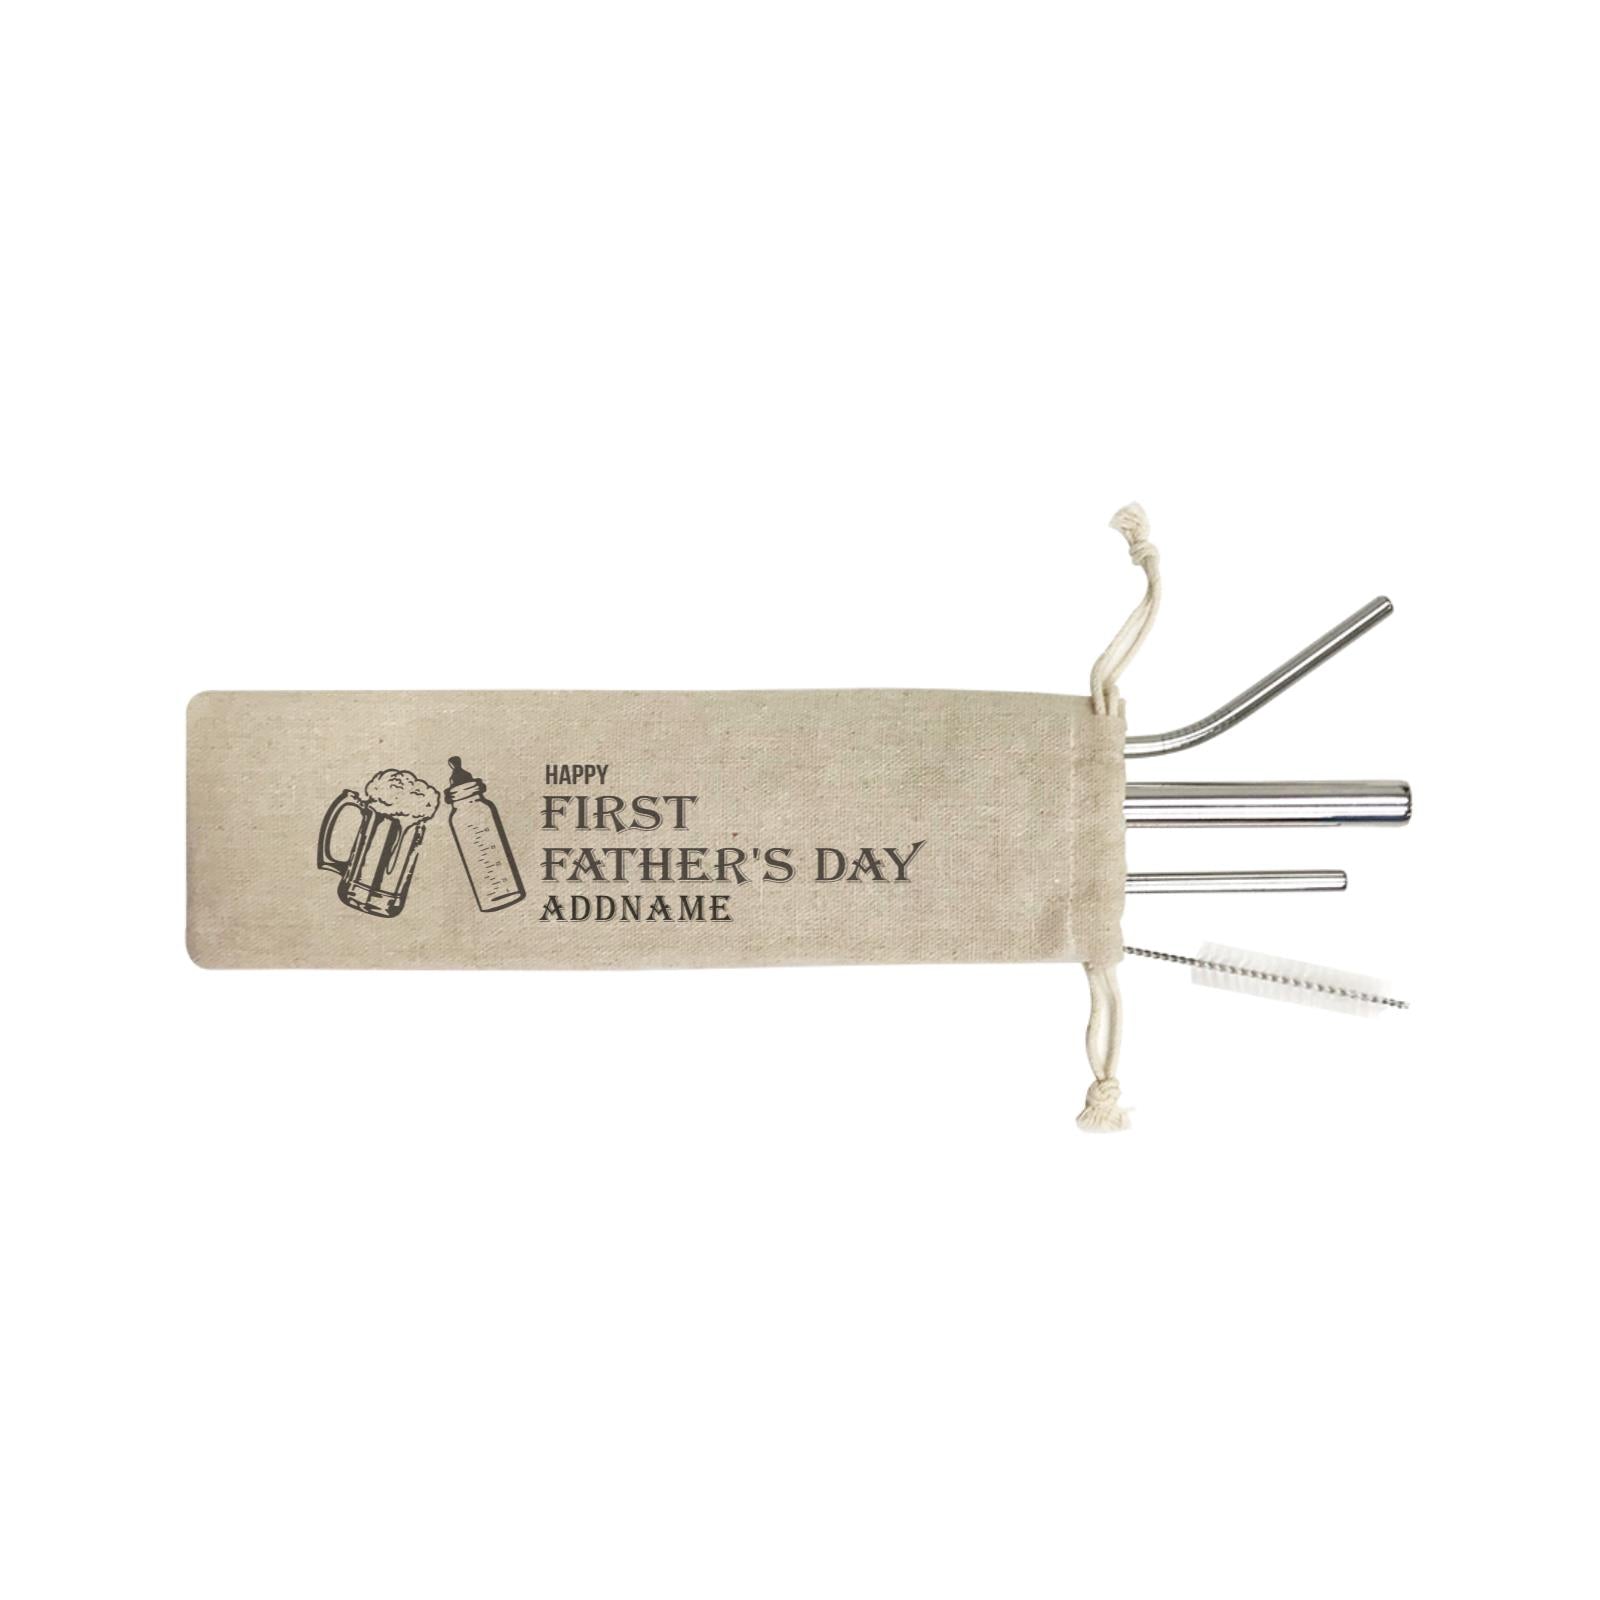 Happy First Father's Day Addname SB 4-In-1 Stainless Steel Straw Set in Satchel